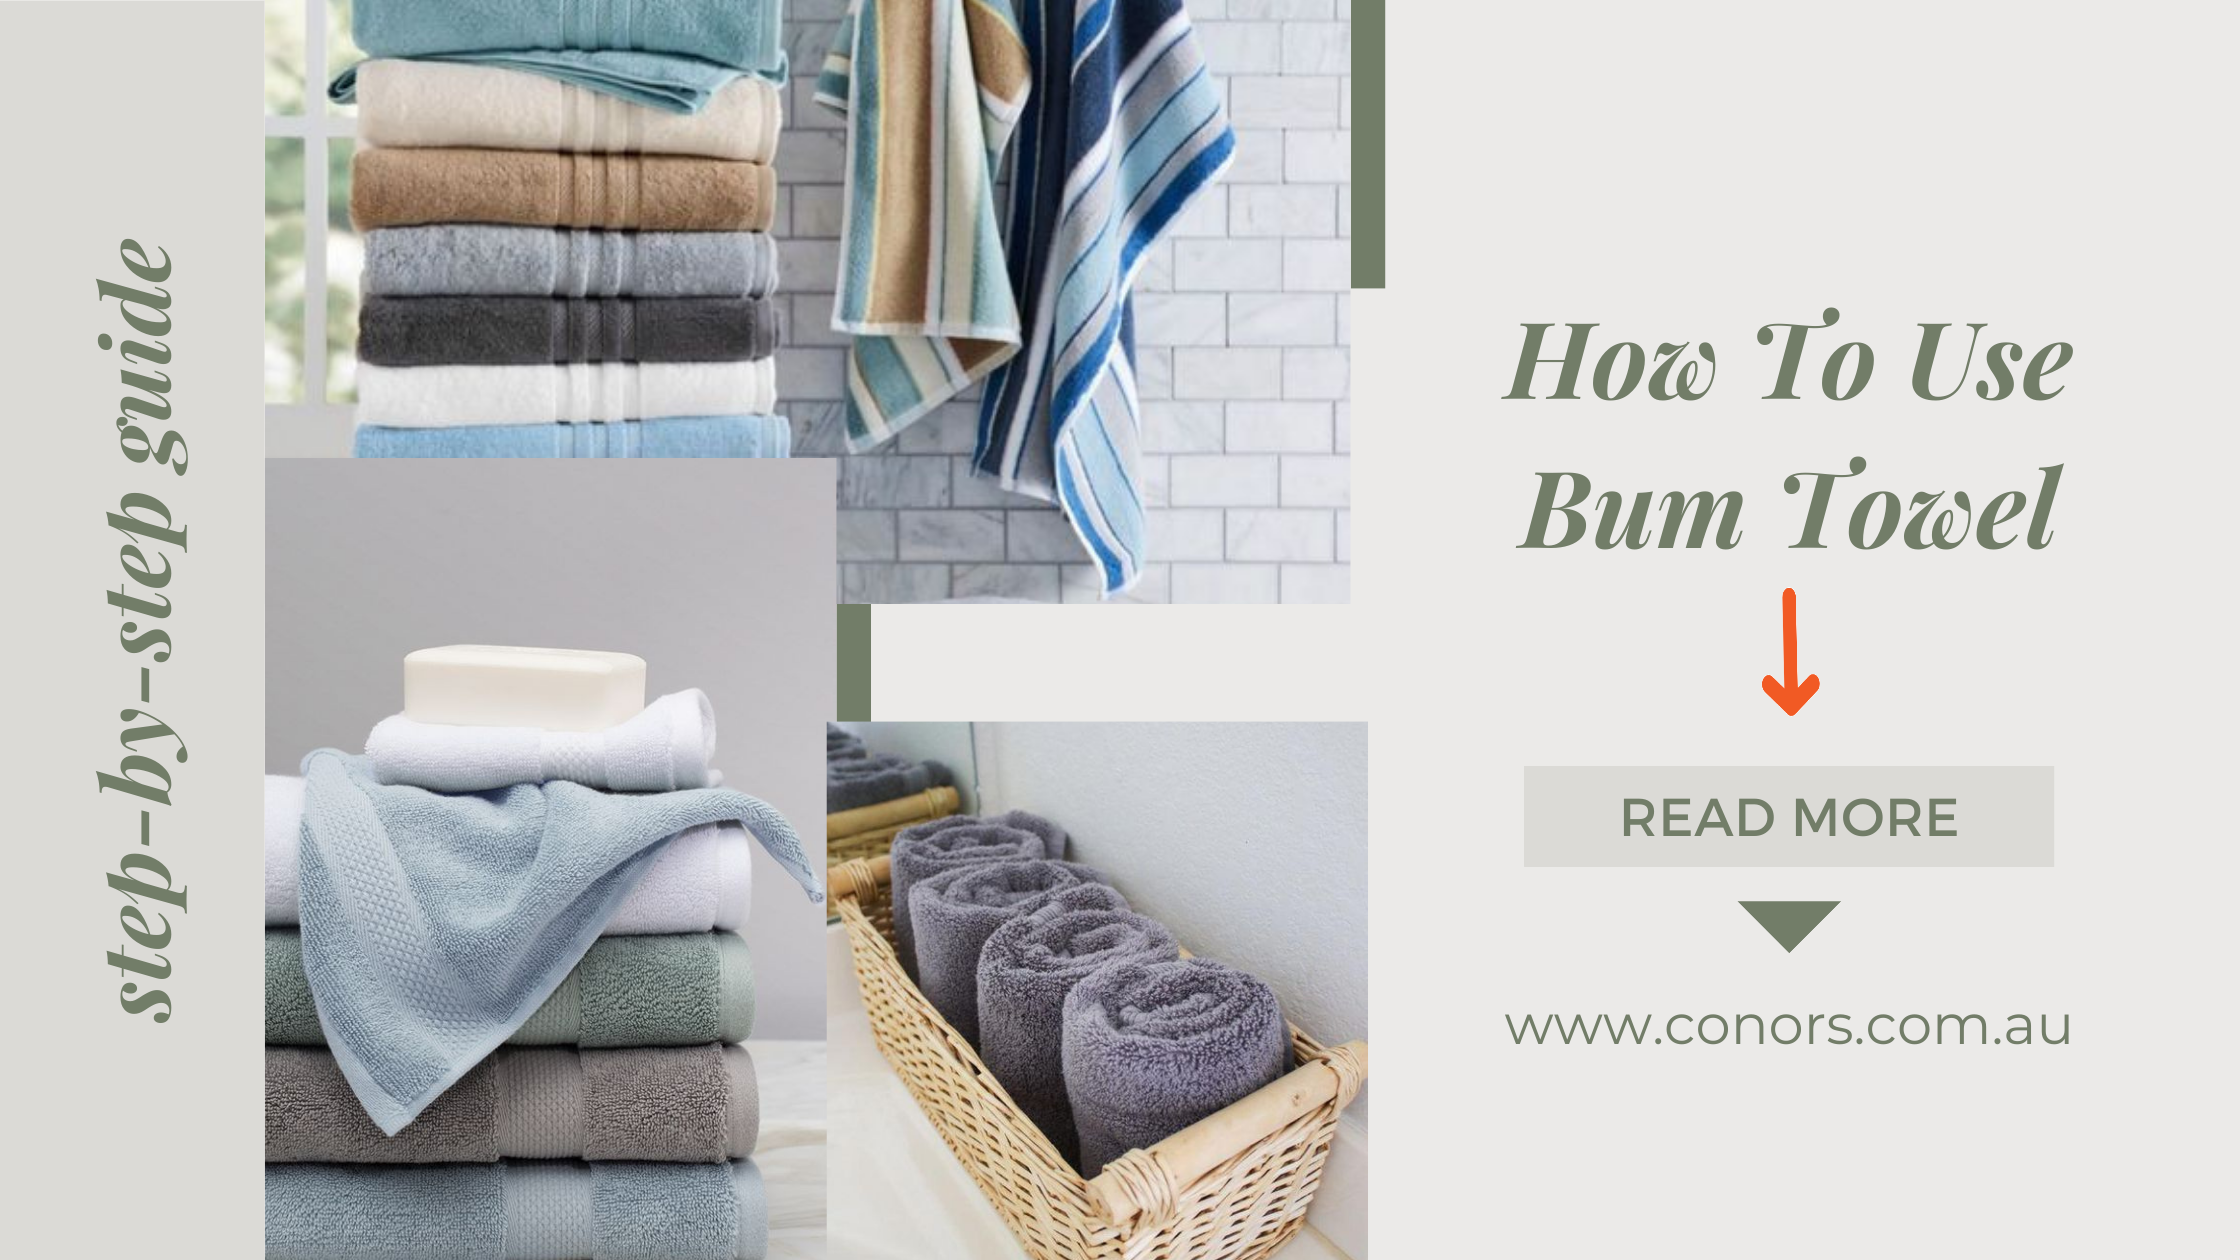 How To Use Bum Towel?